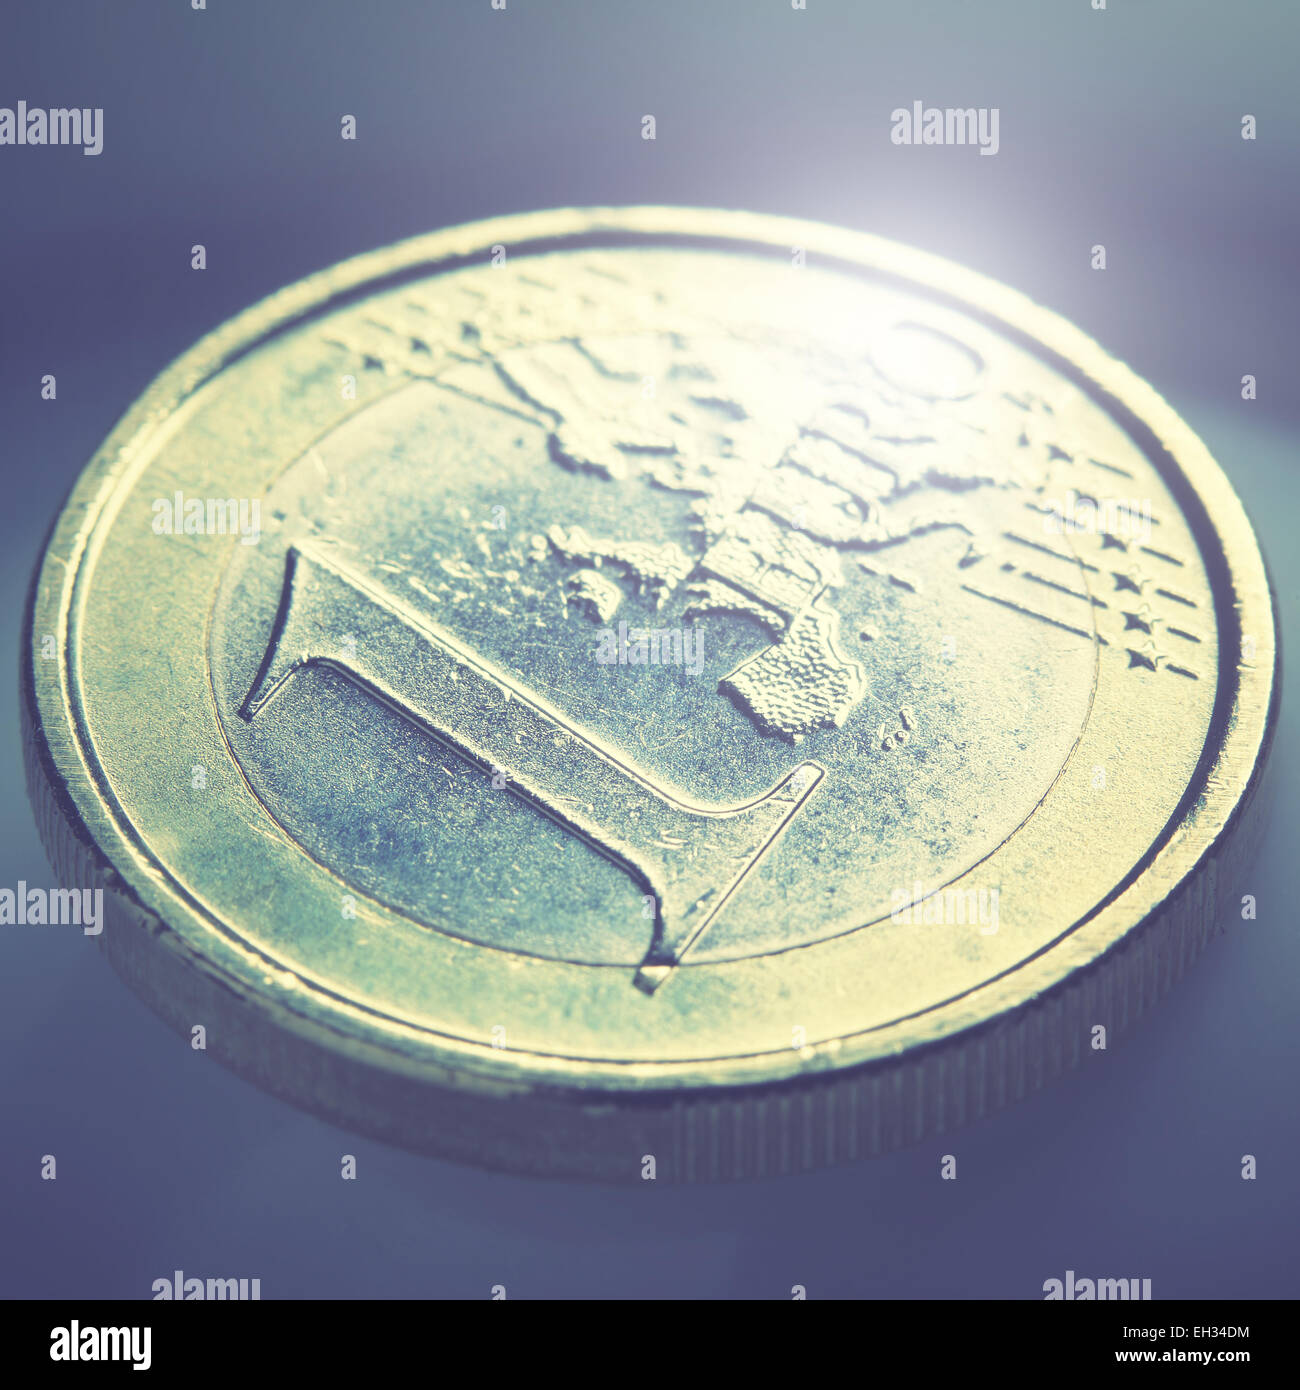 Euro coin close-up. Shallow DOF! Retro style filtred image Stock Photo